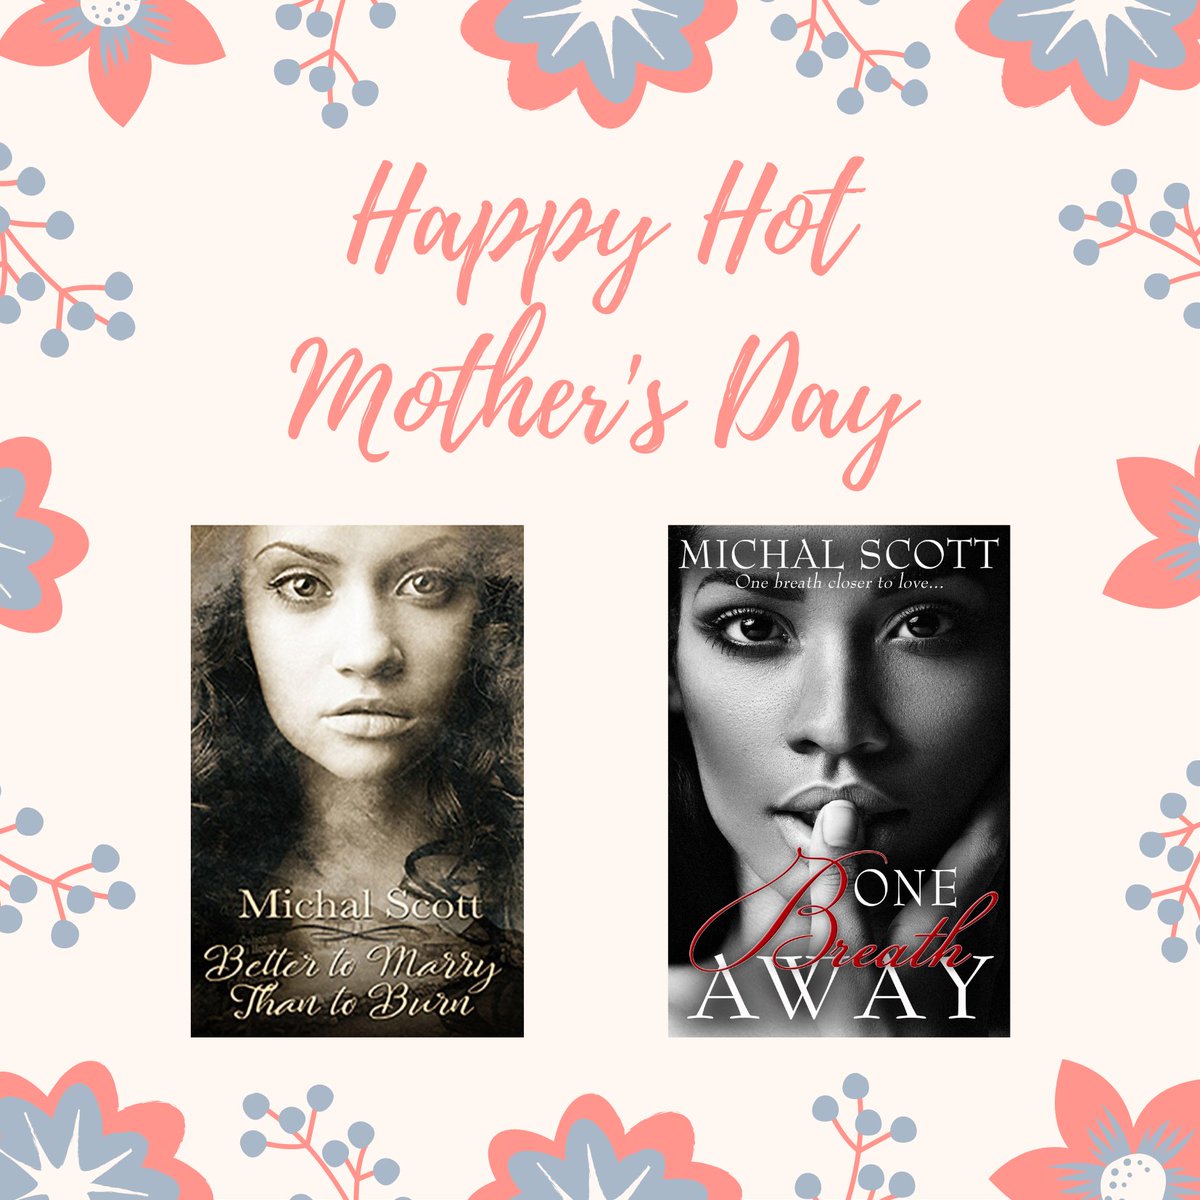 Lay down the flowers and give your #romanceloving mom these two short and #steamy #historicalromance reads by Michal Scott  for #MothersDay. amzn.to/2TSHzRn #blacklove #novella #WRPbks